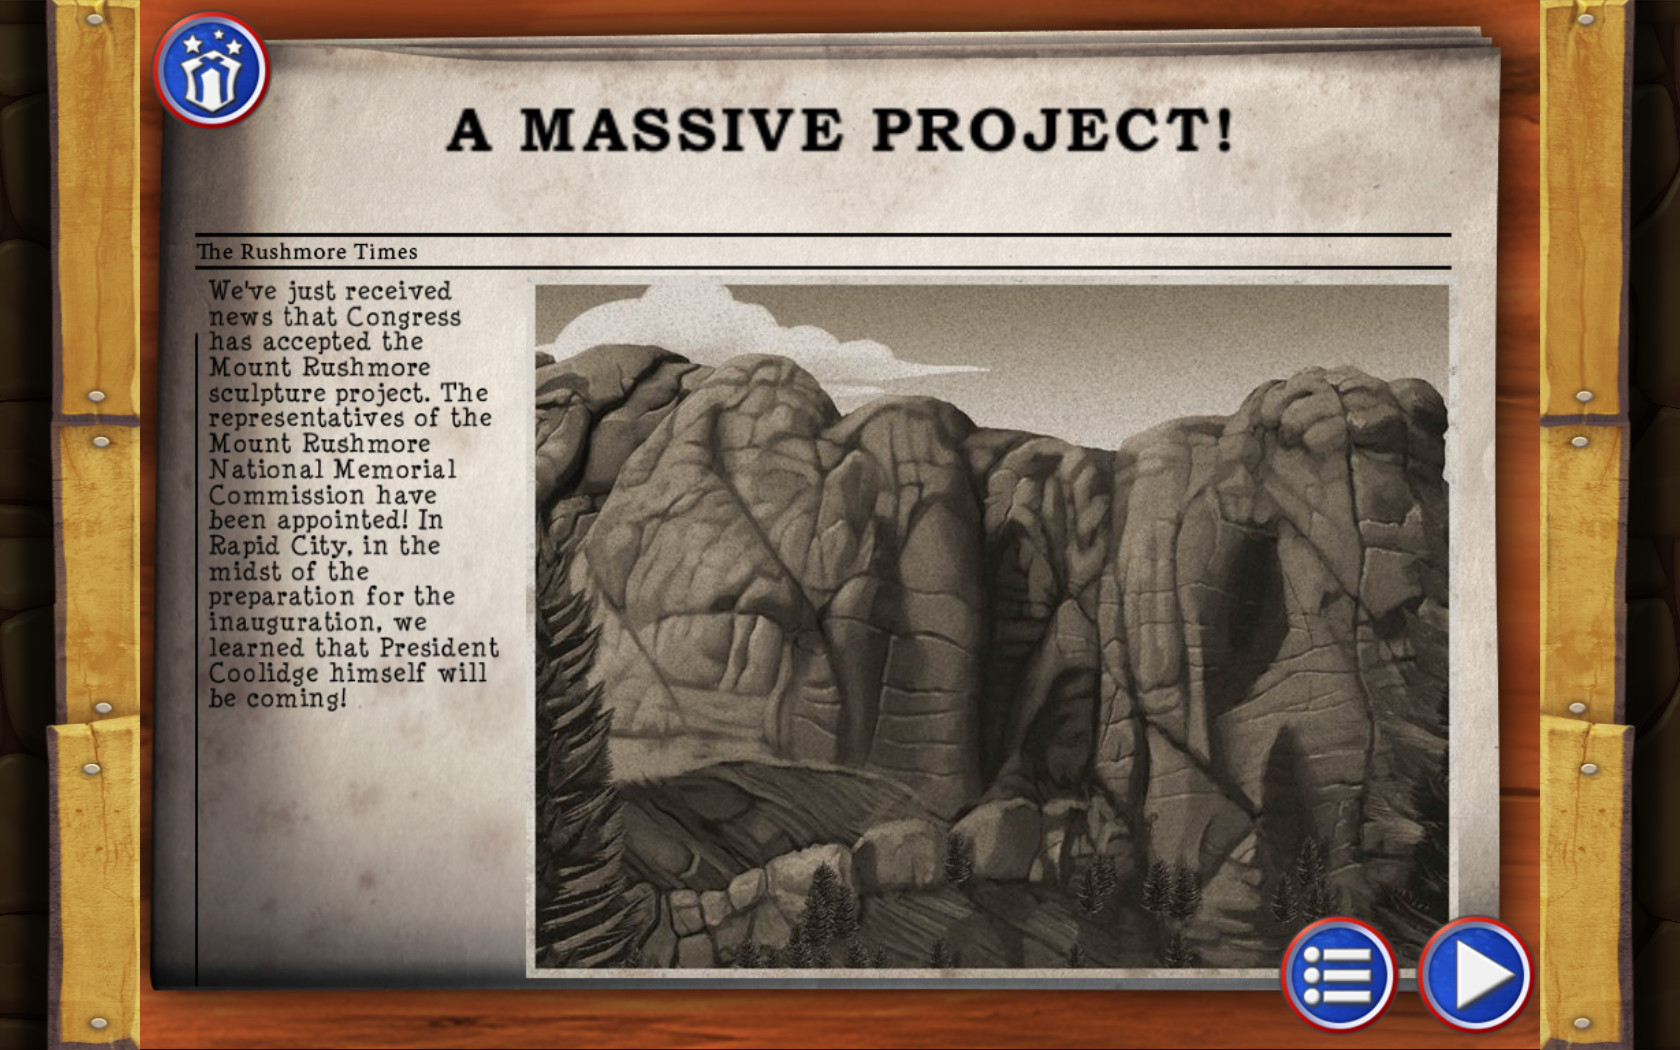 5-in-1 Pack - Monument Builders: Destination USA screenshot